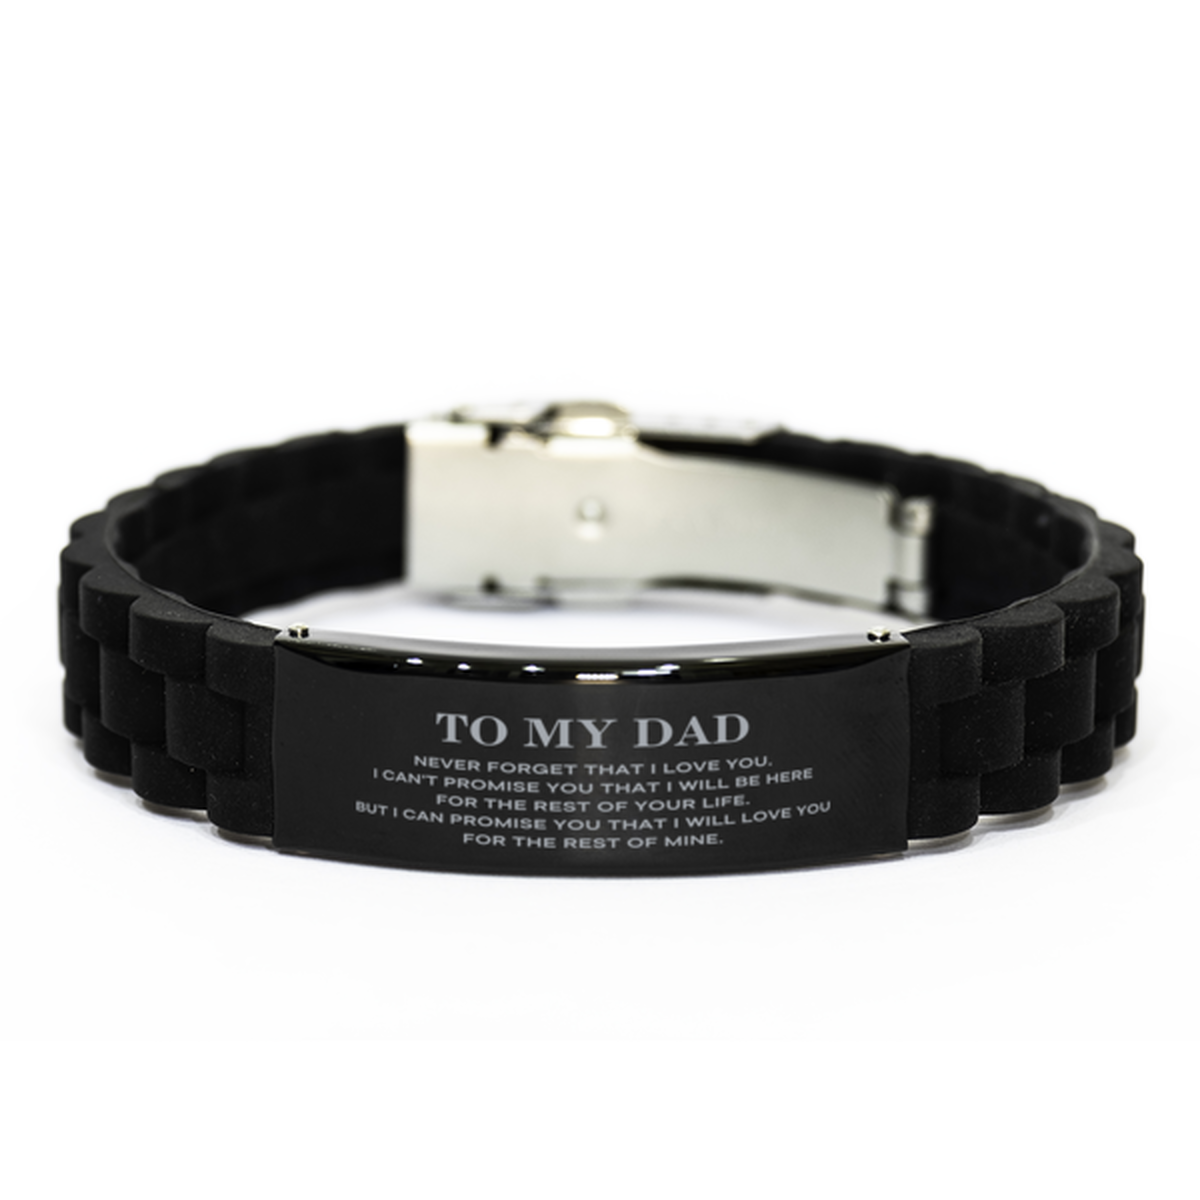 To My Dad Gifts, I will love you for the rest of mine, Love Dad Bracelet, Birthday Christmas Unique Black Glidelock Clasp Bracelet For Dad